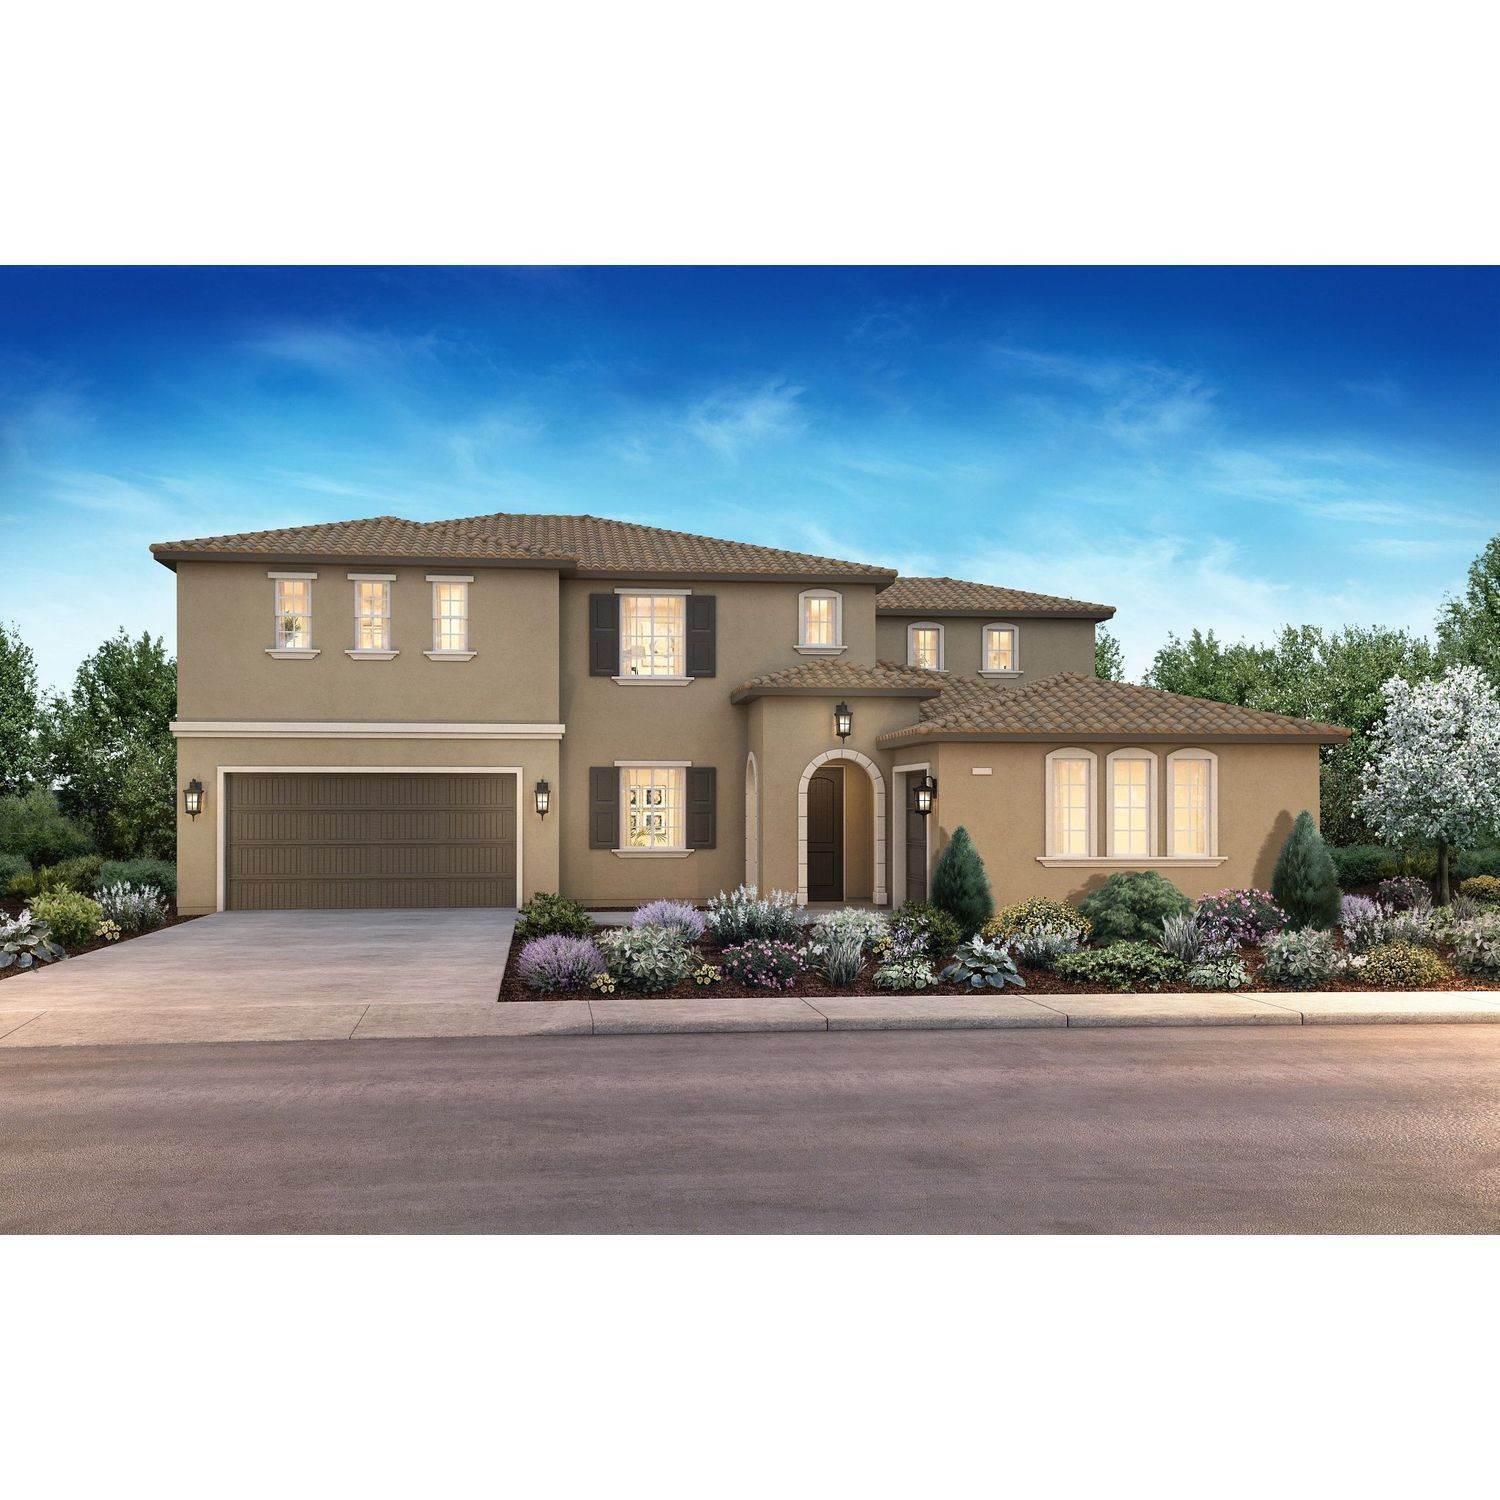 1. Single Family for Active at Orchard Trails - Plan 3 154 Continente Ave BRENTWOOD, CALIFORNIA 94513 UNITED STATES